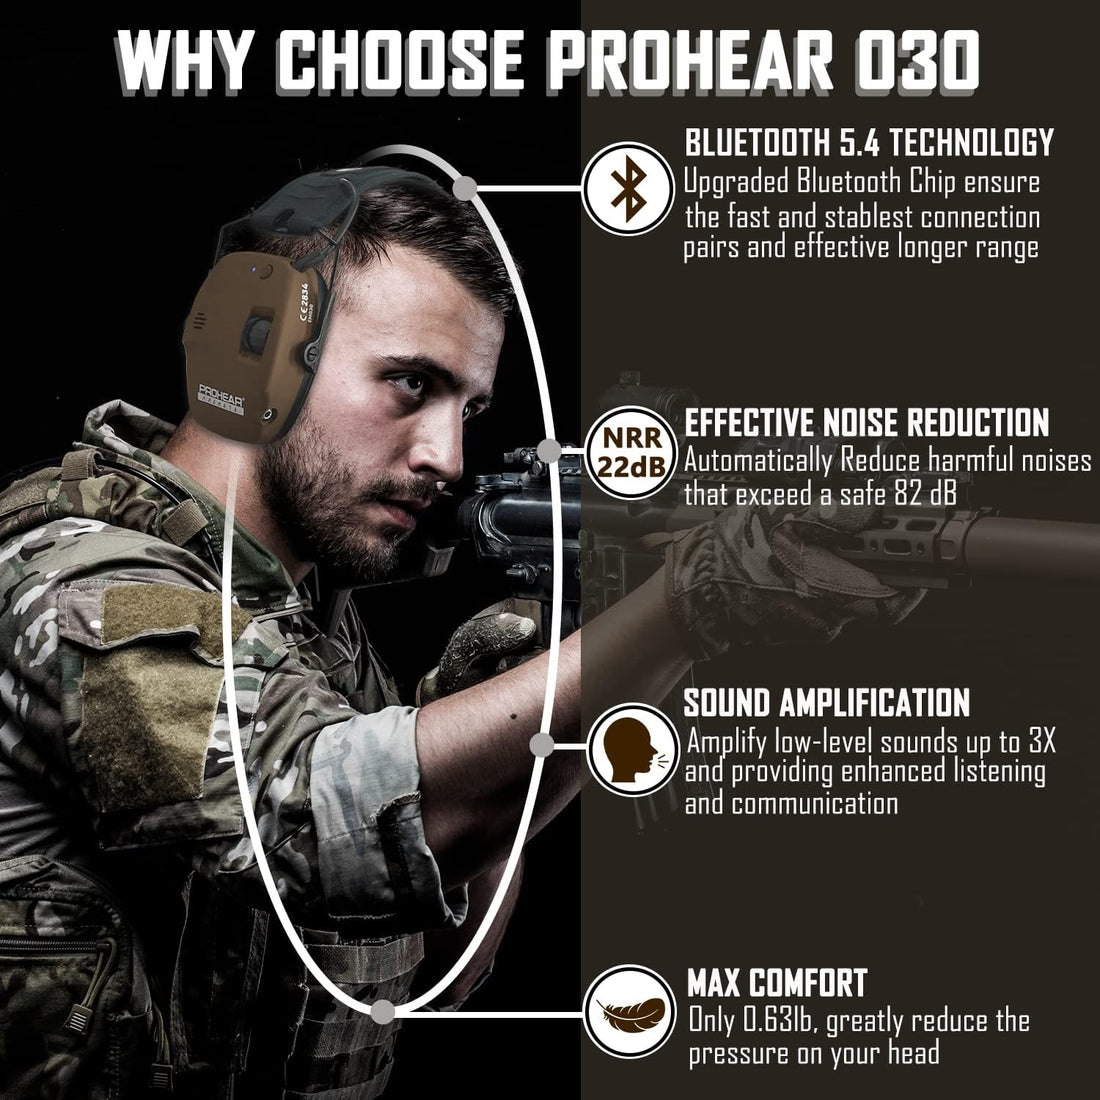 PROHEAR 030 Upgraded Bluetooth Electronic Shooting Hearing Protection Muffs with GEP02 Gel Ear Pads, Noise Reduction Sound Amplification Headsets for Gun Range, Hunting, Gifts for Women Man - Brown